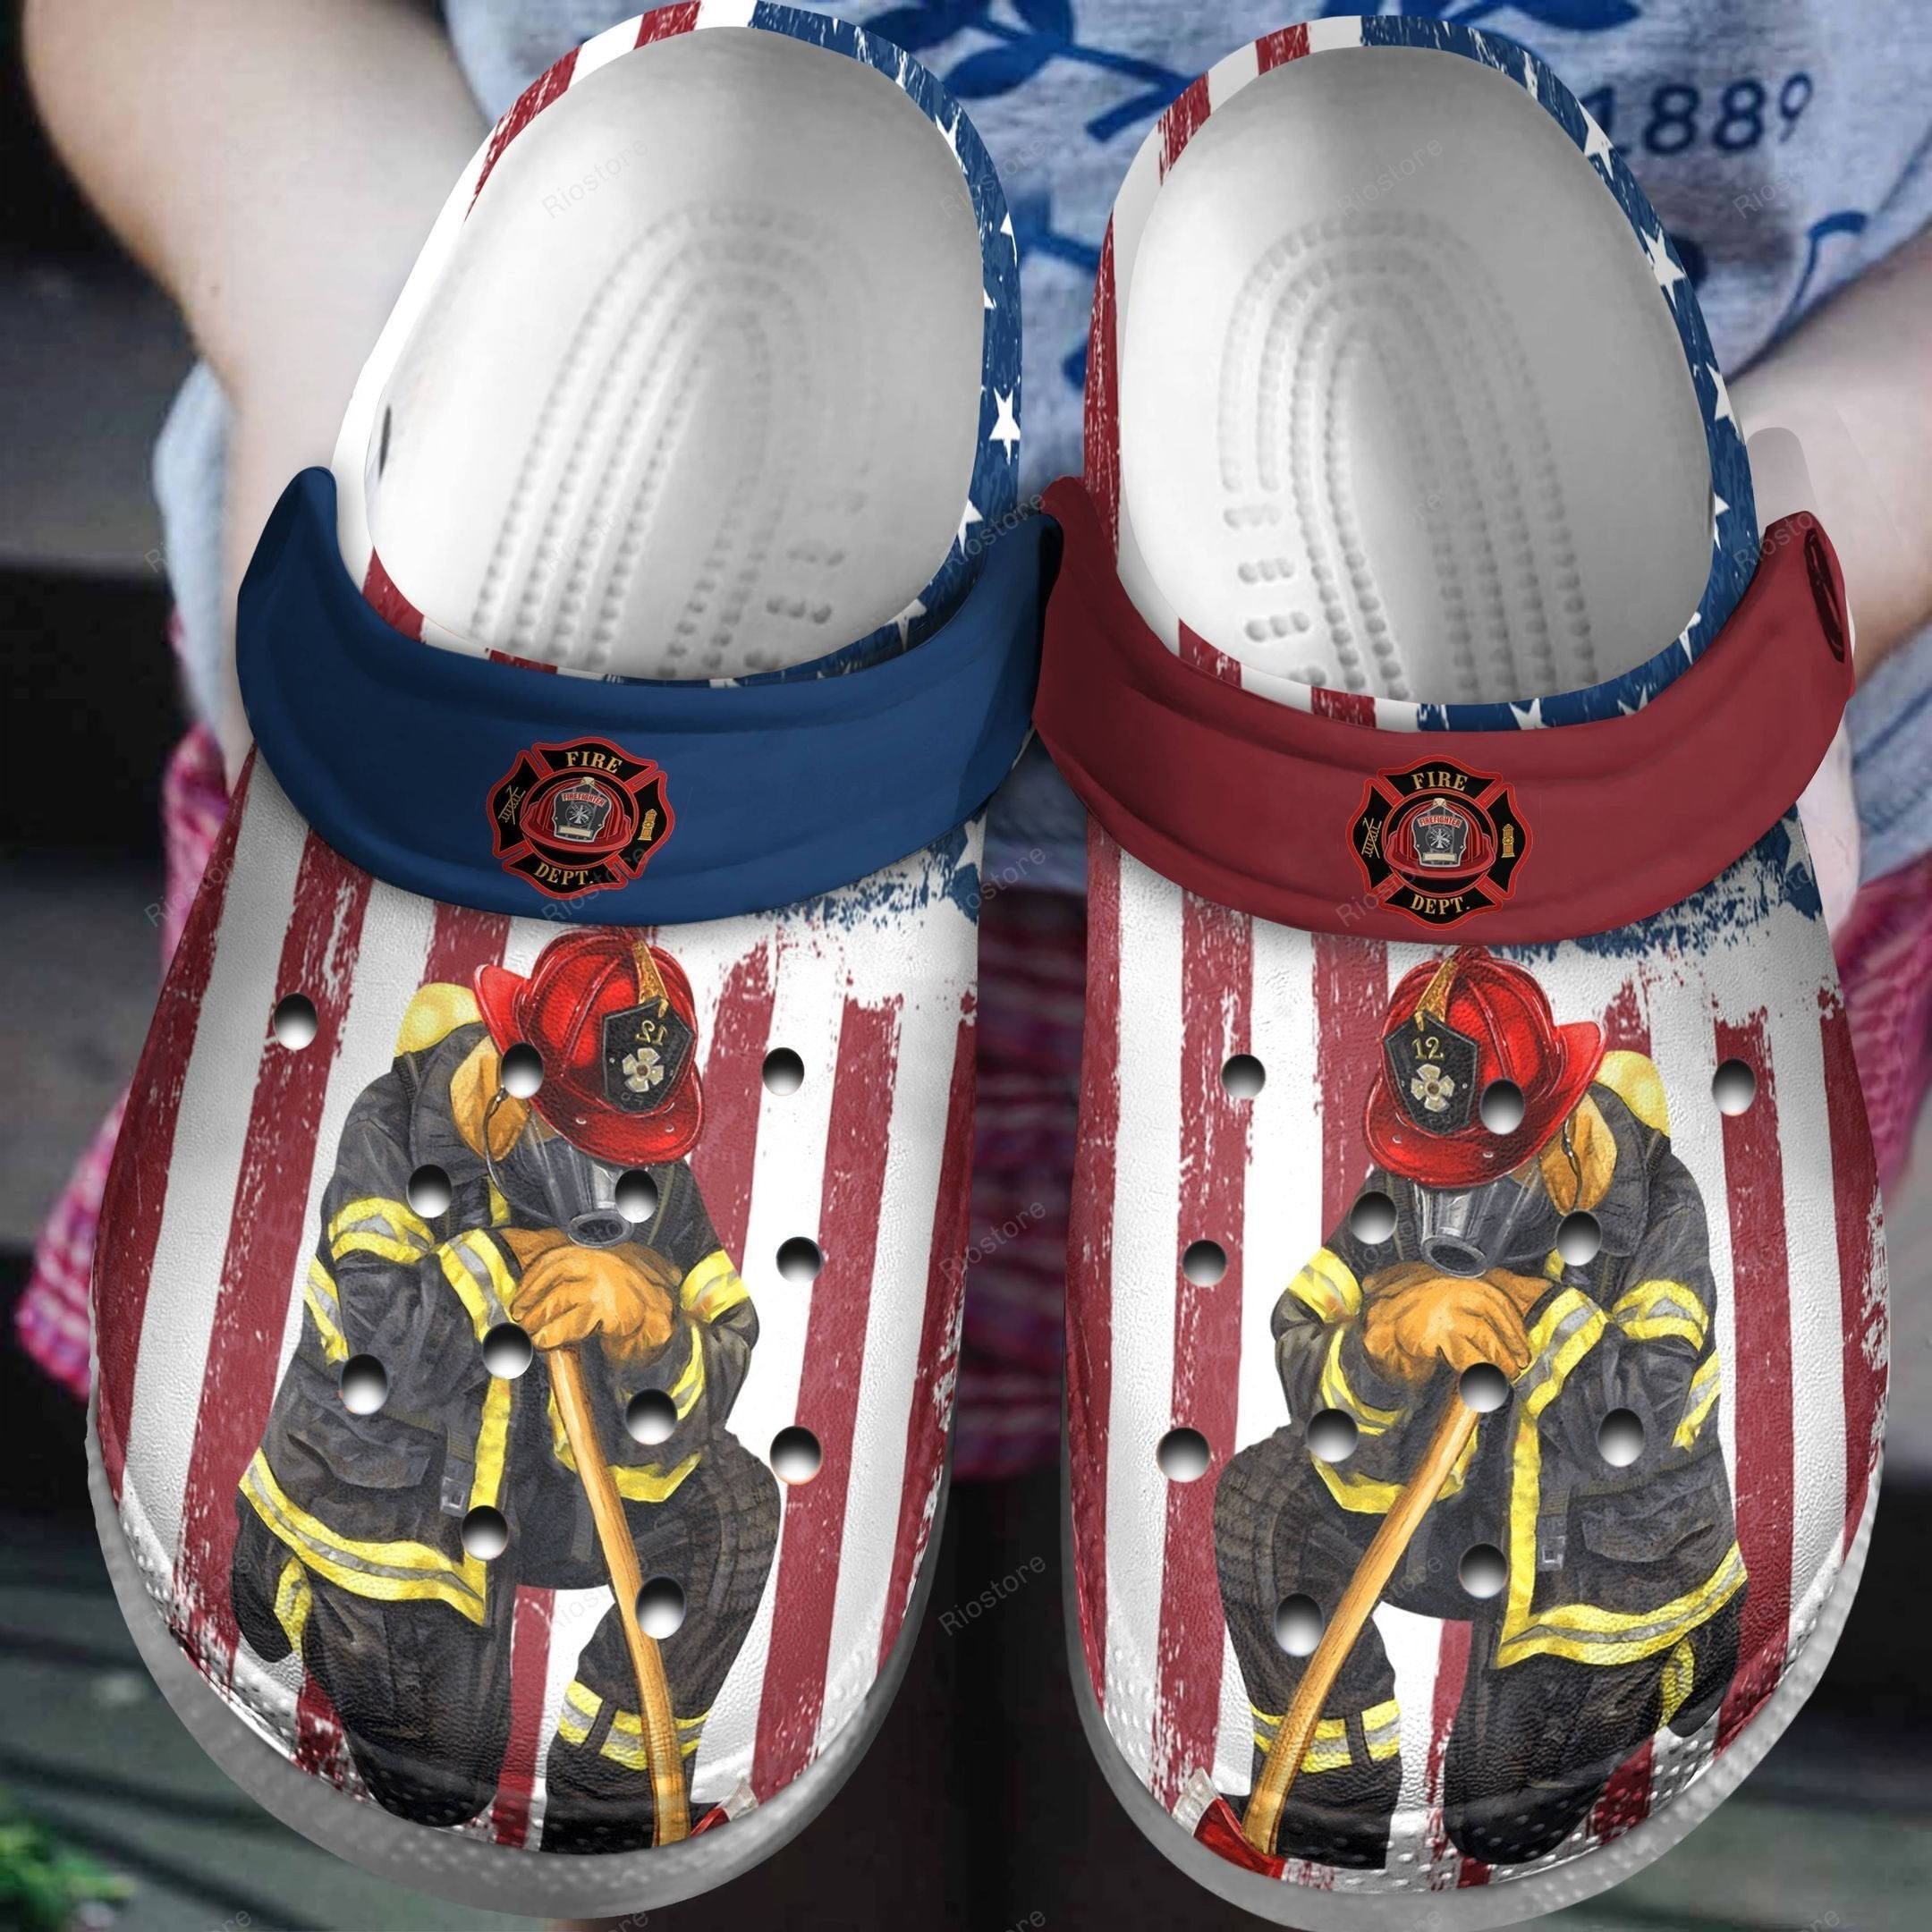 Firefighter Usa Crocs Shoes Clogs Men - Fire Dept Custom Crocs Shoes Clogs Gifts For Father Day